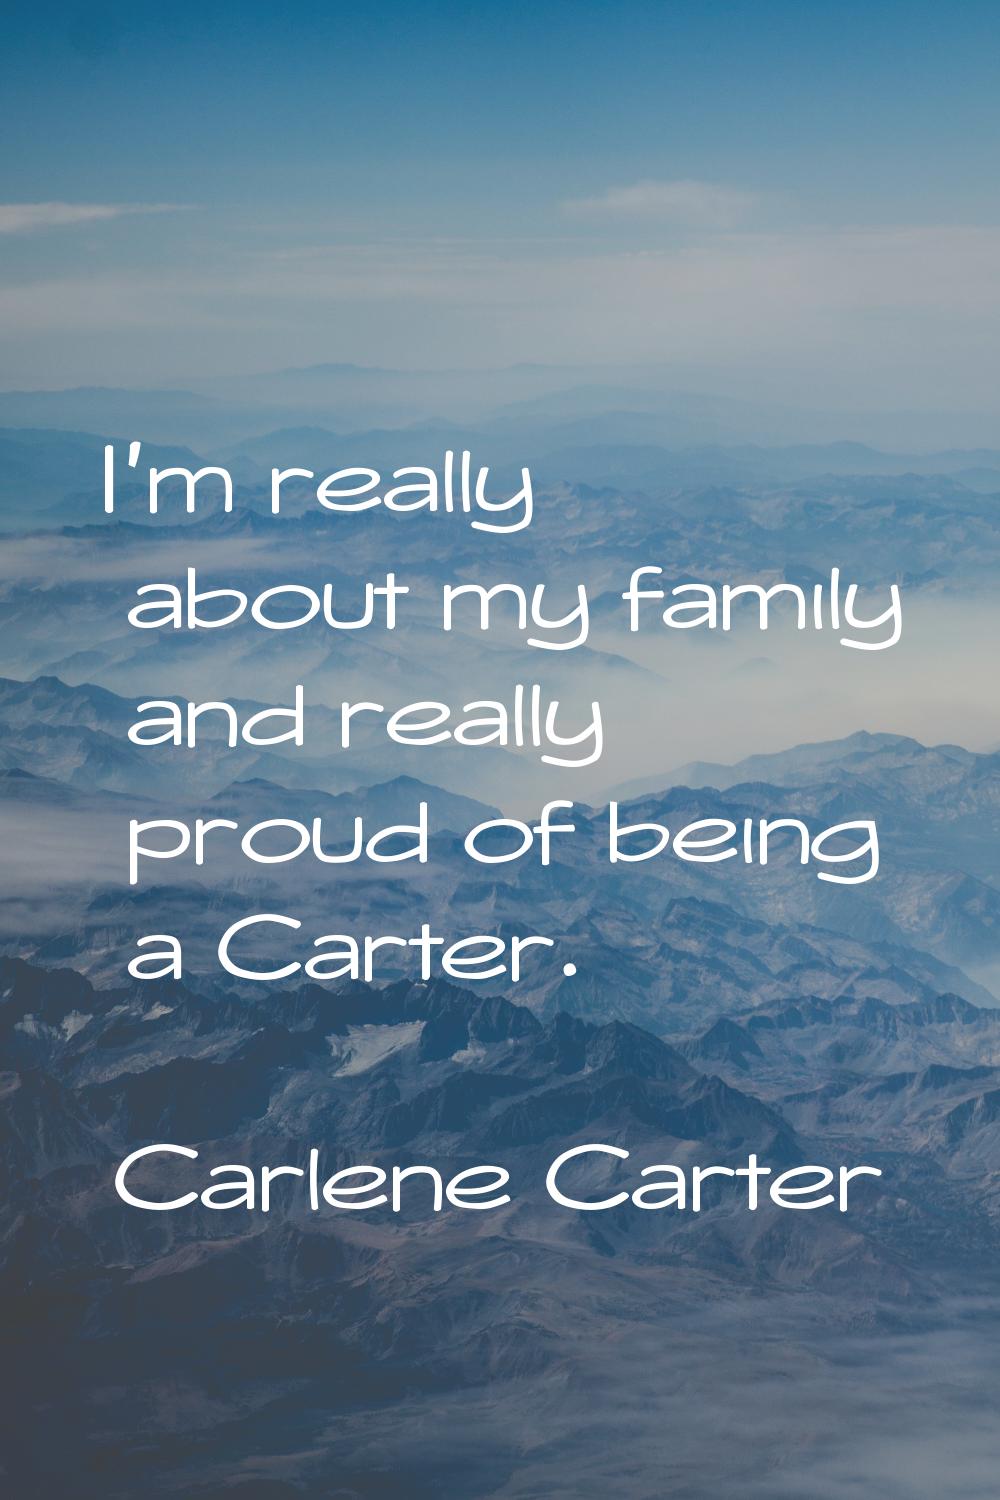 I'm really about my family and really proud of being a Carter.